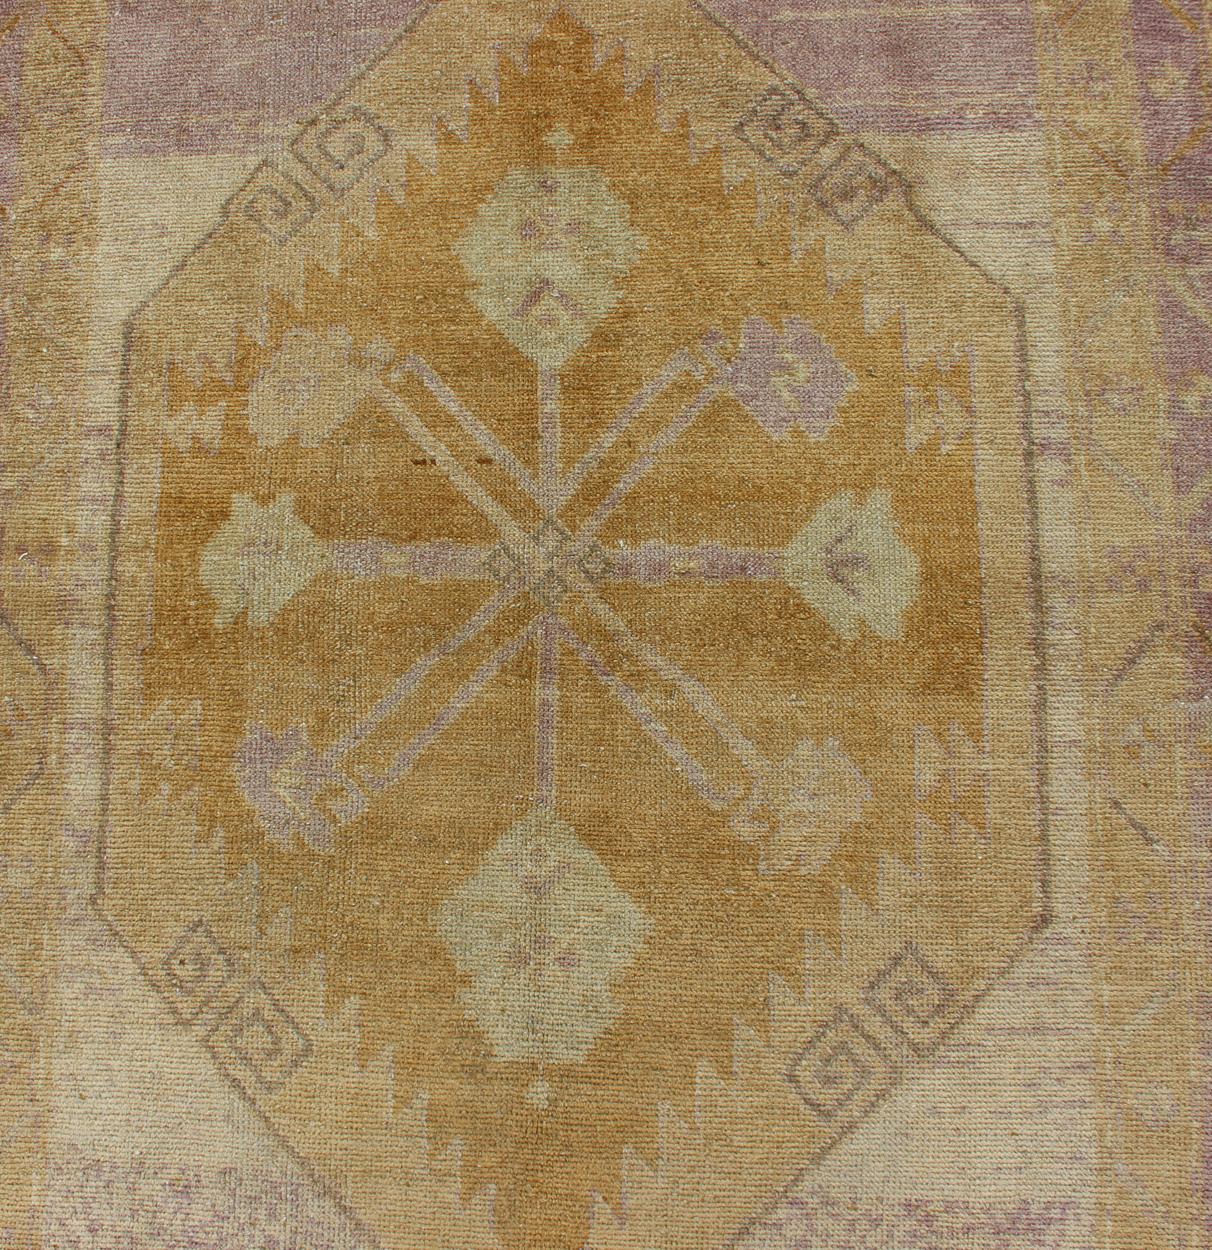 Wool Antique Turkish Oushak Runner with Three Geometric Medallions in Purple Tones For Sale